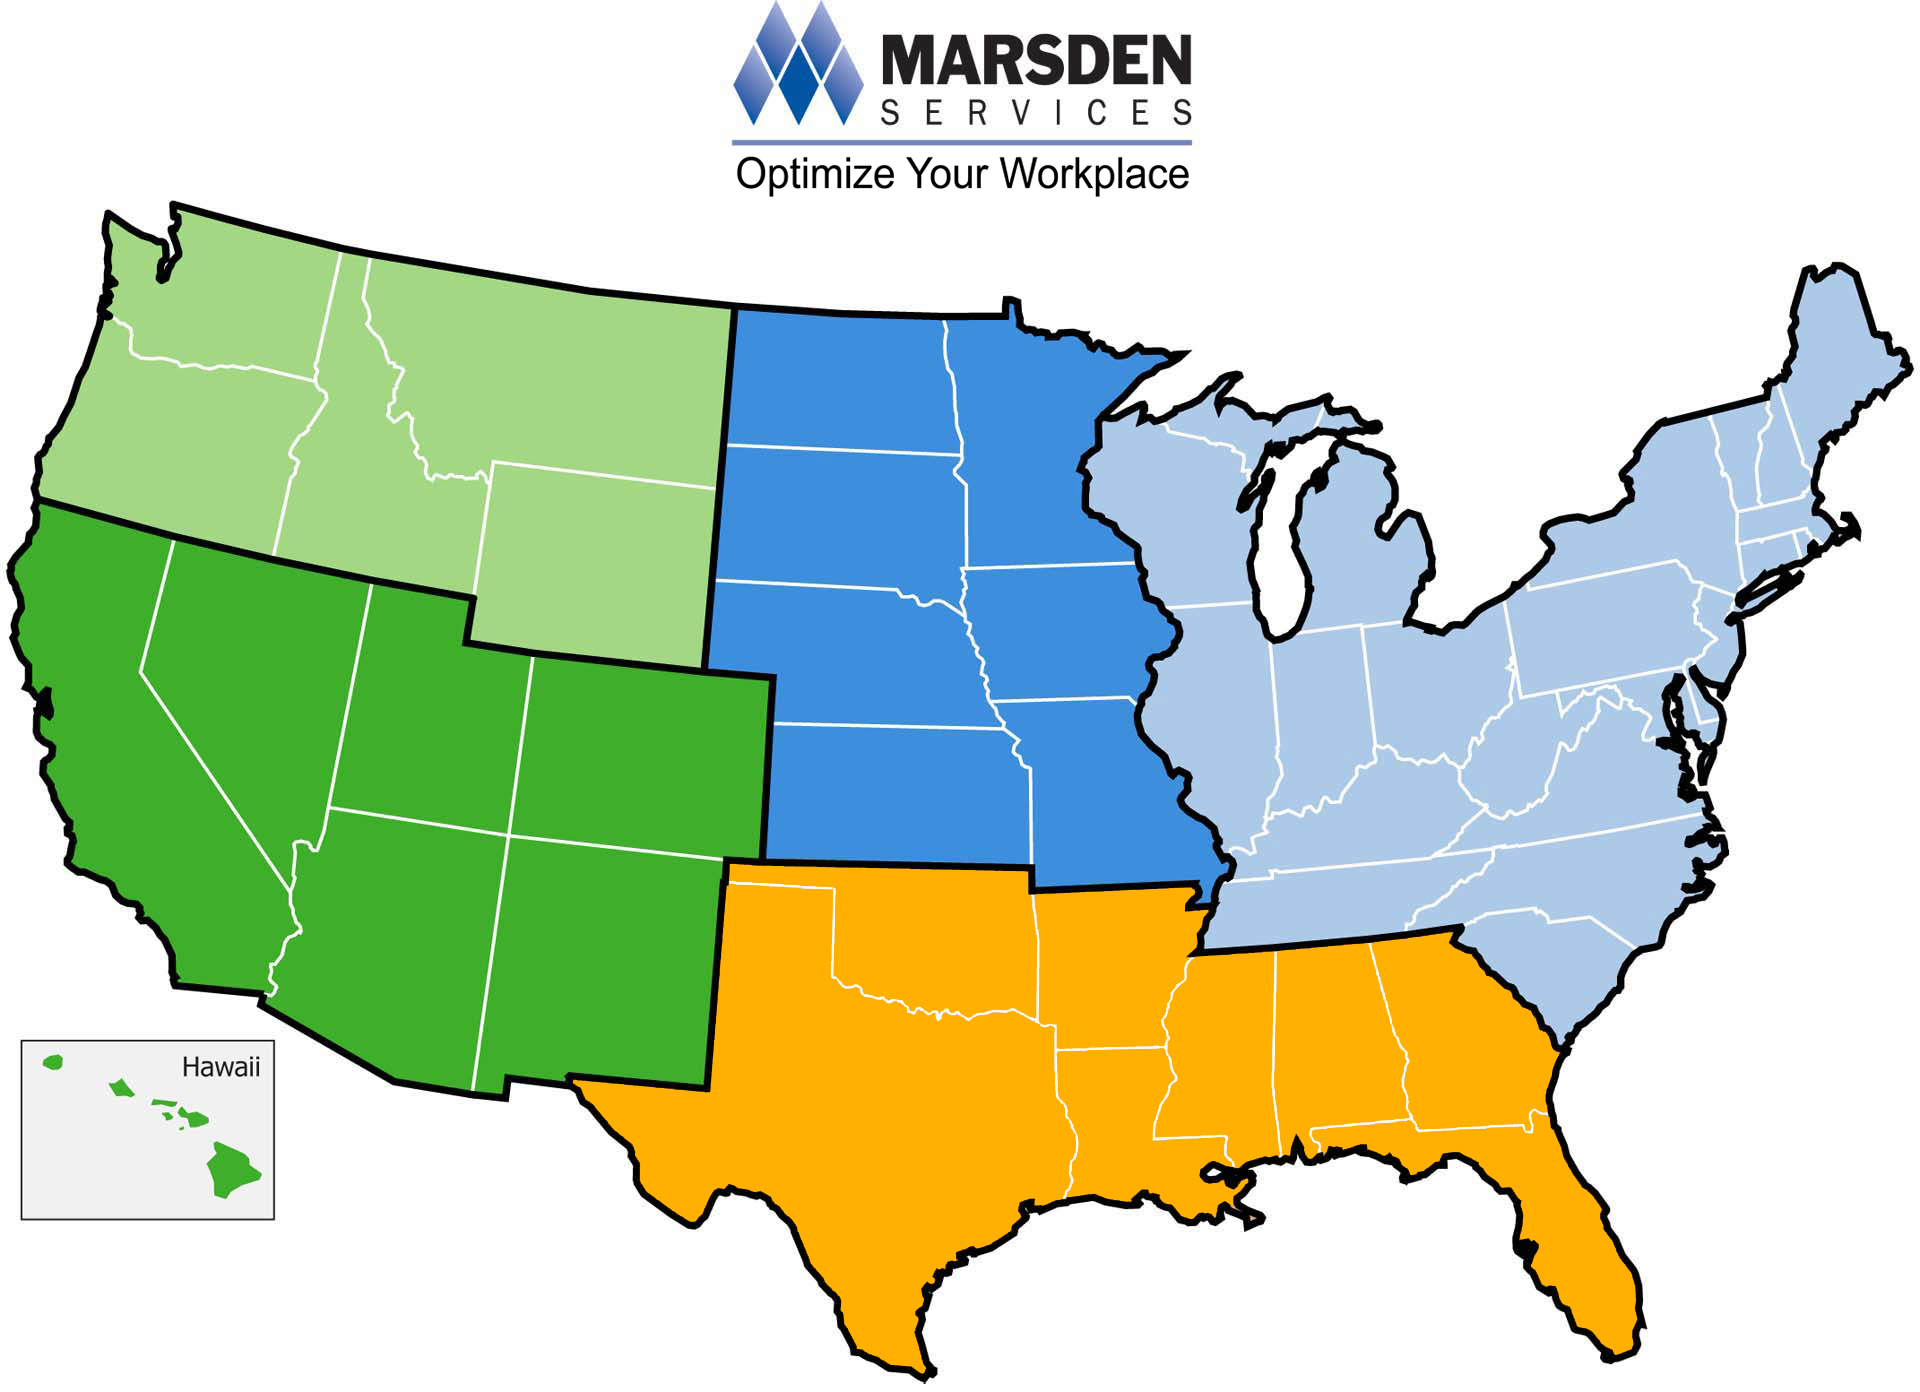 Marsden Services - Optimize Your Workplace - Clean, Climatize, Calibrate, Protect